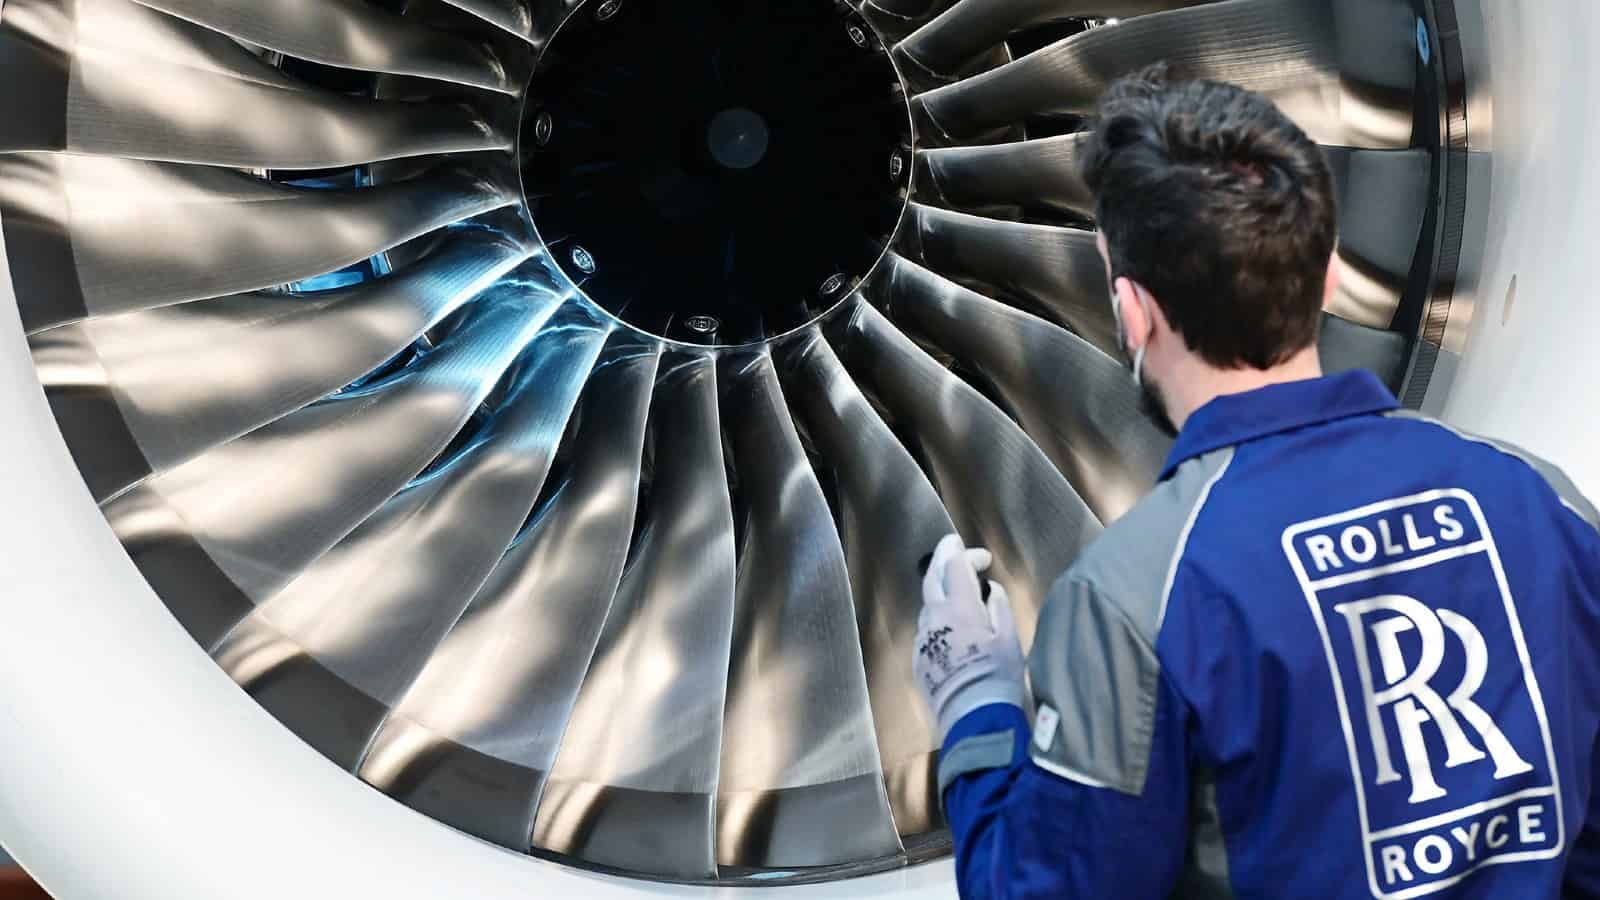 why has the rolls-royce share price stalled around £4?